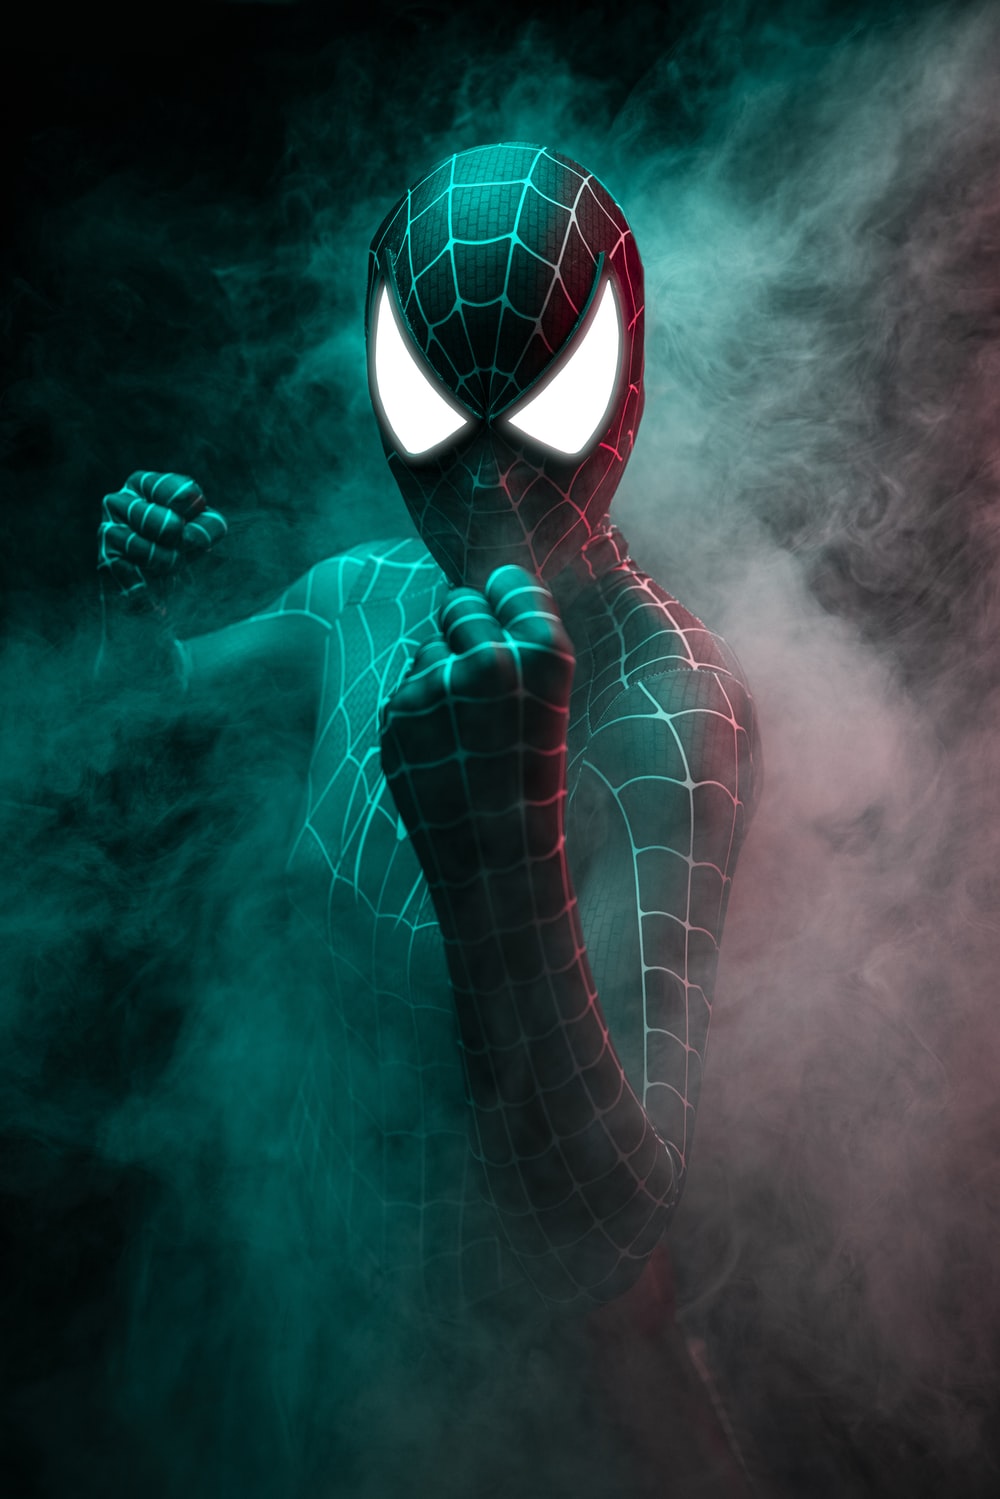 Spiderman Picture [HD]. Download Free Image